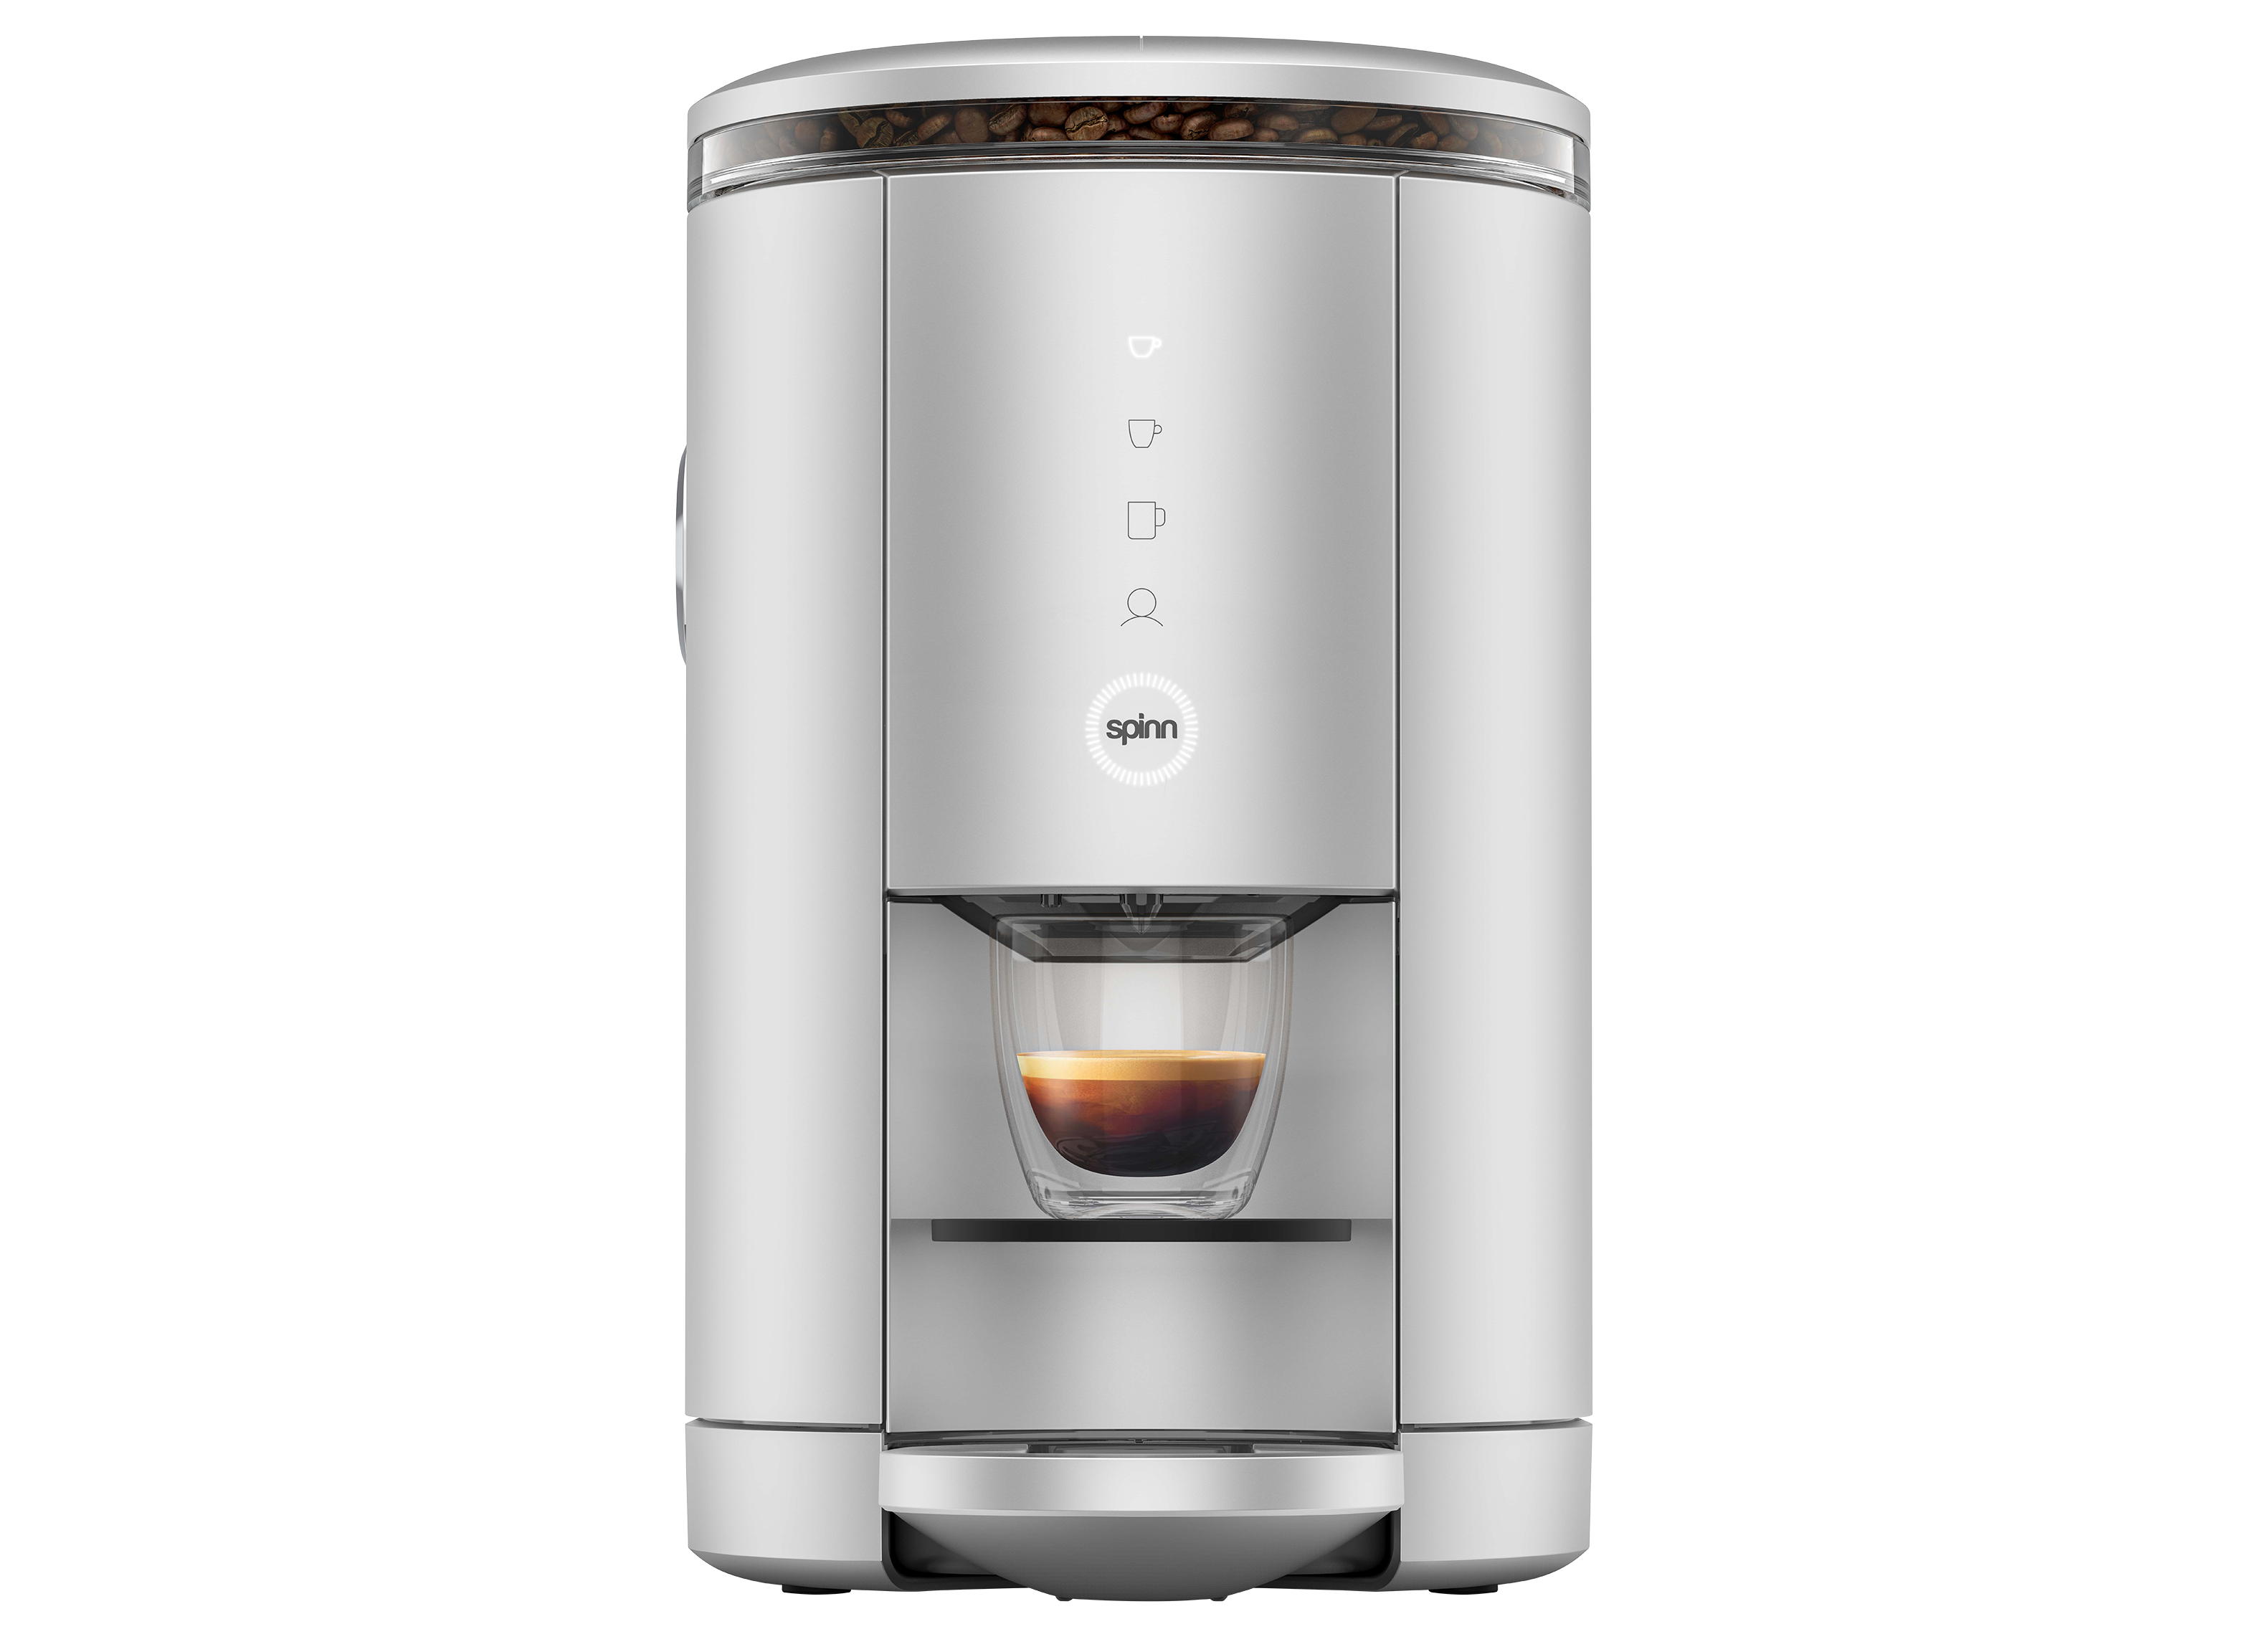 https://crdms.images.consumerreports.org/prod/products/cr/models/405584-electric-french-press-coffee-makers-spinn-original-plus-10026681.png